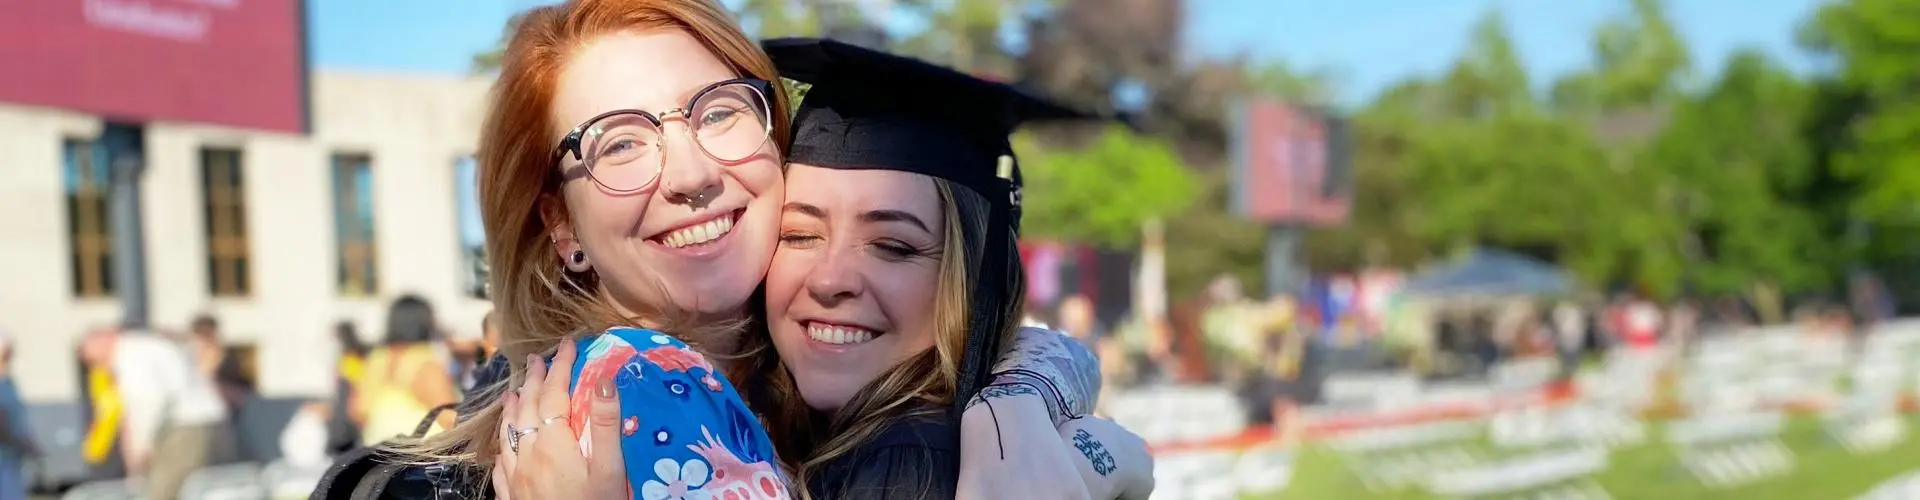 Student in cap and gown hugging friend